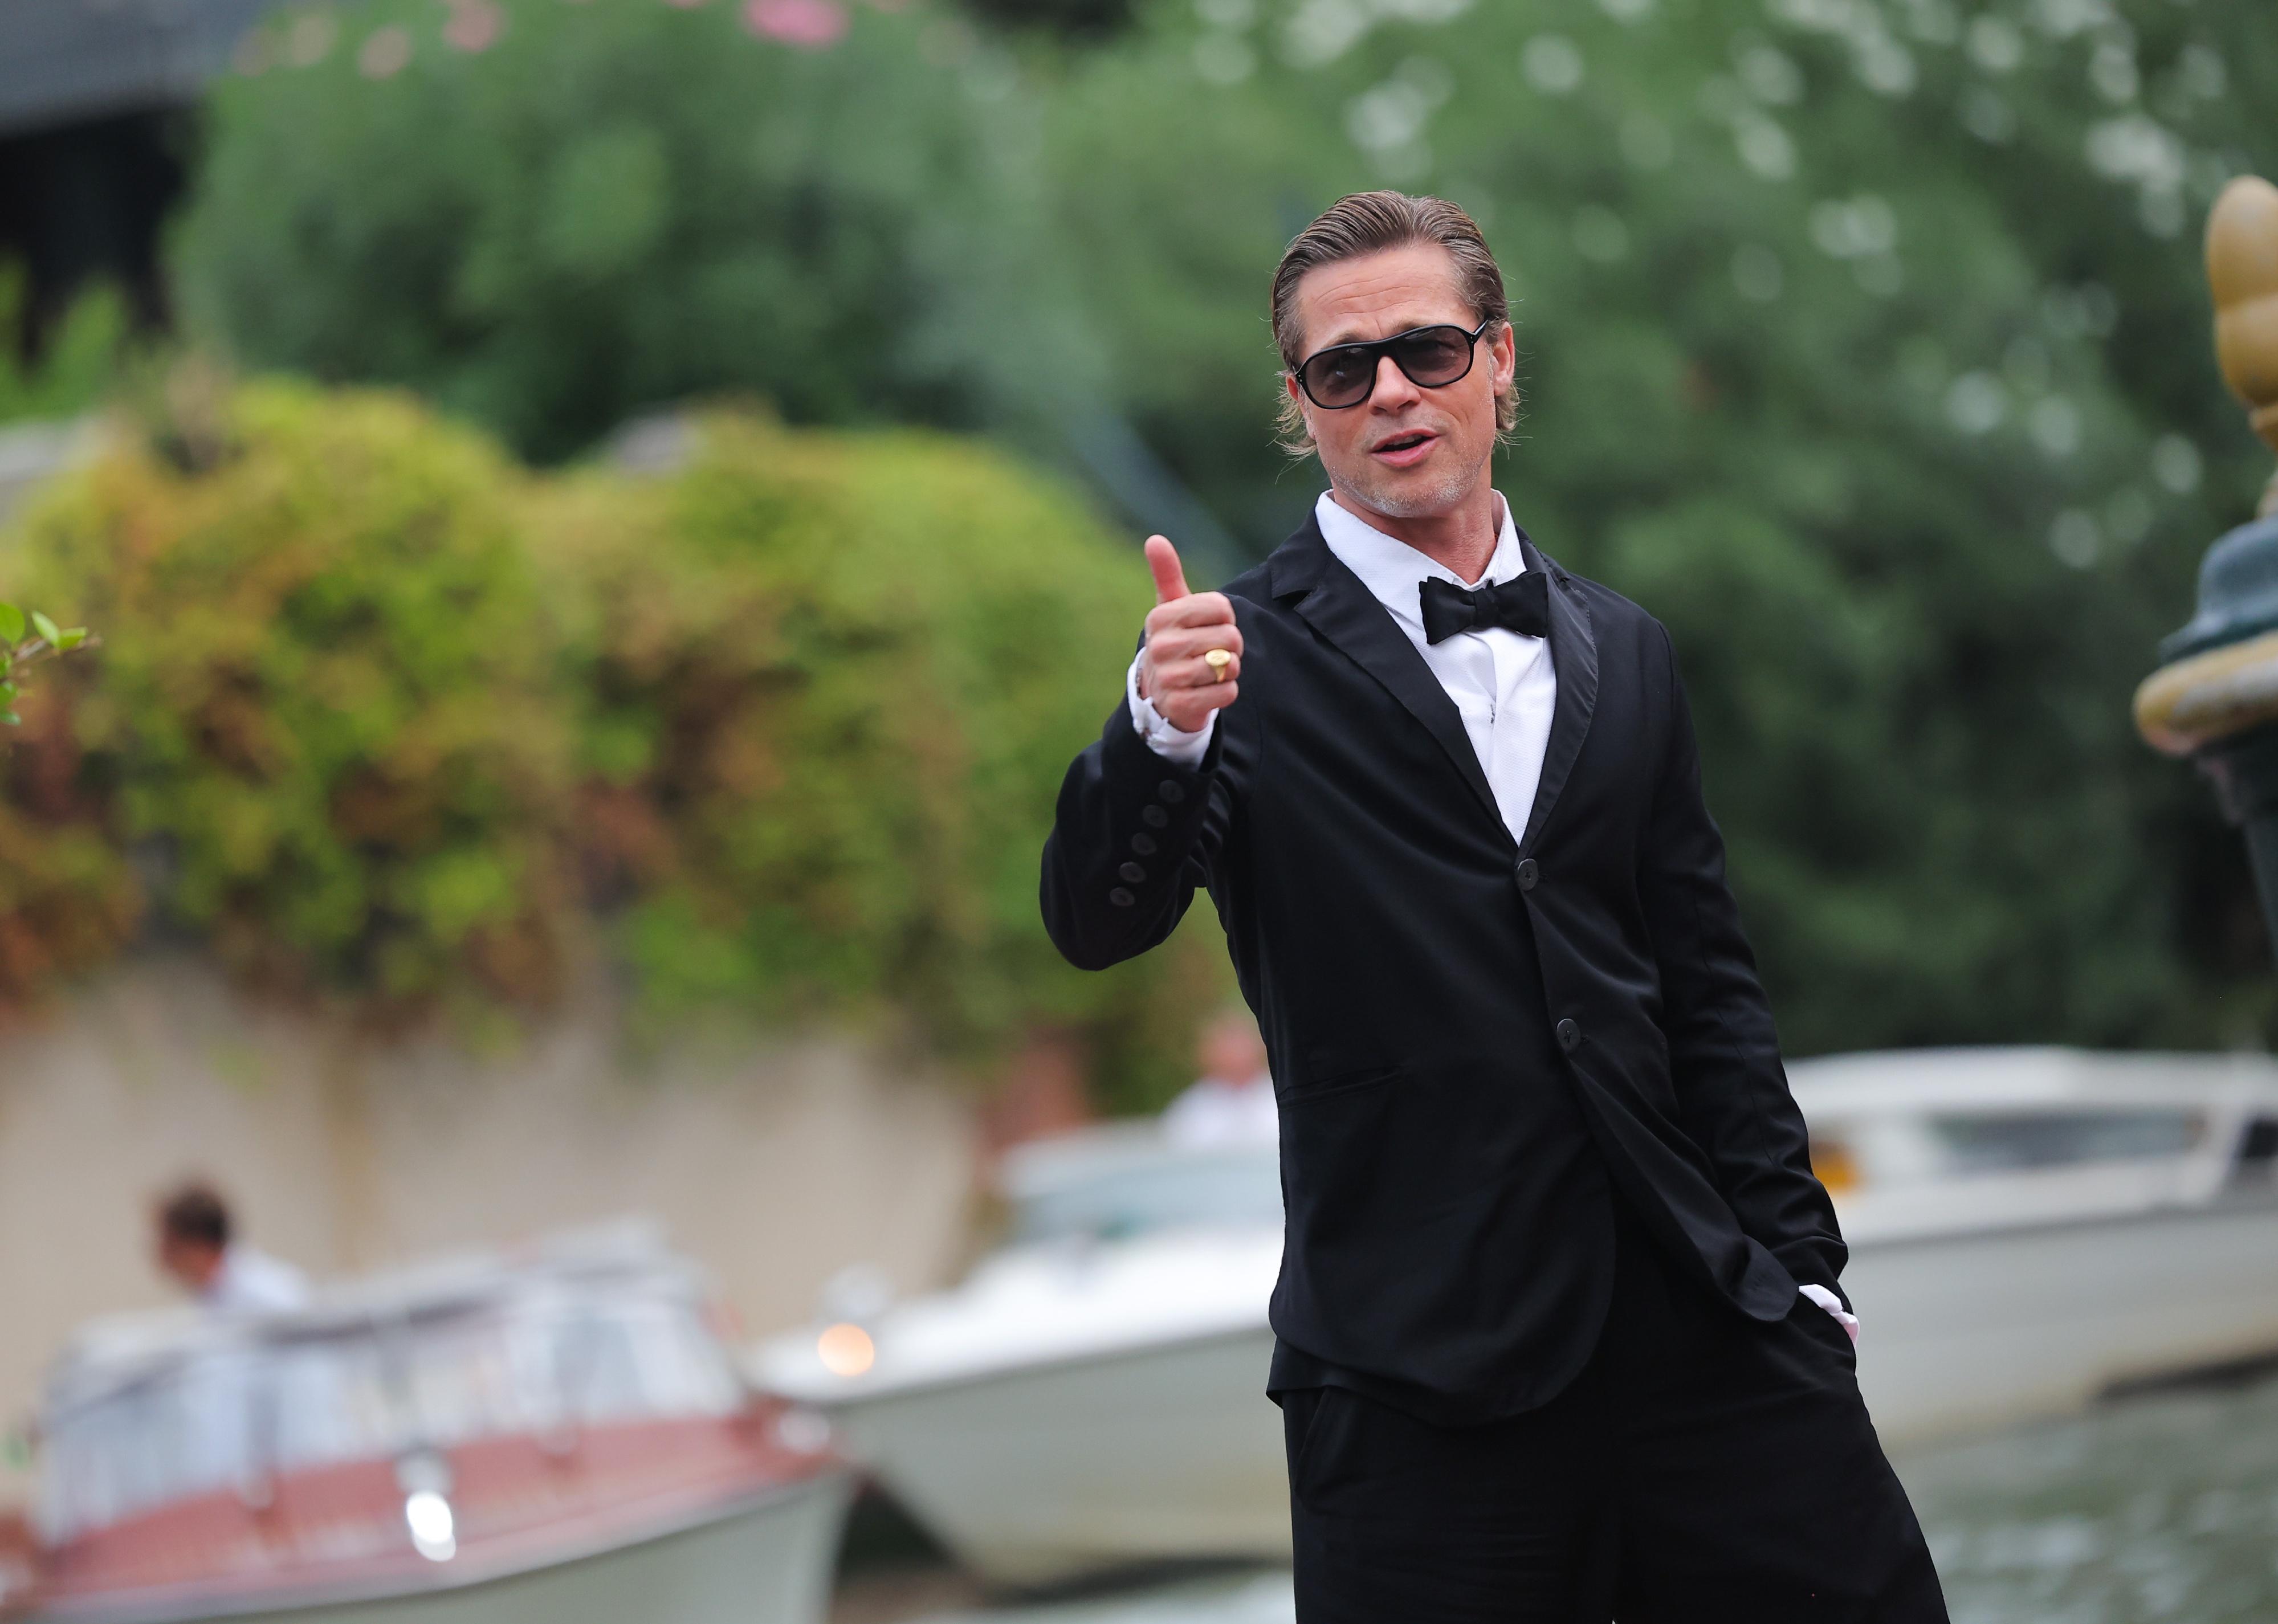 Brad Pitt in a black suit and bowtie giving the thumbs up.